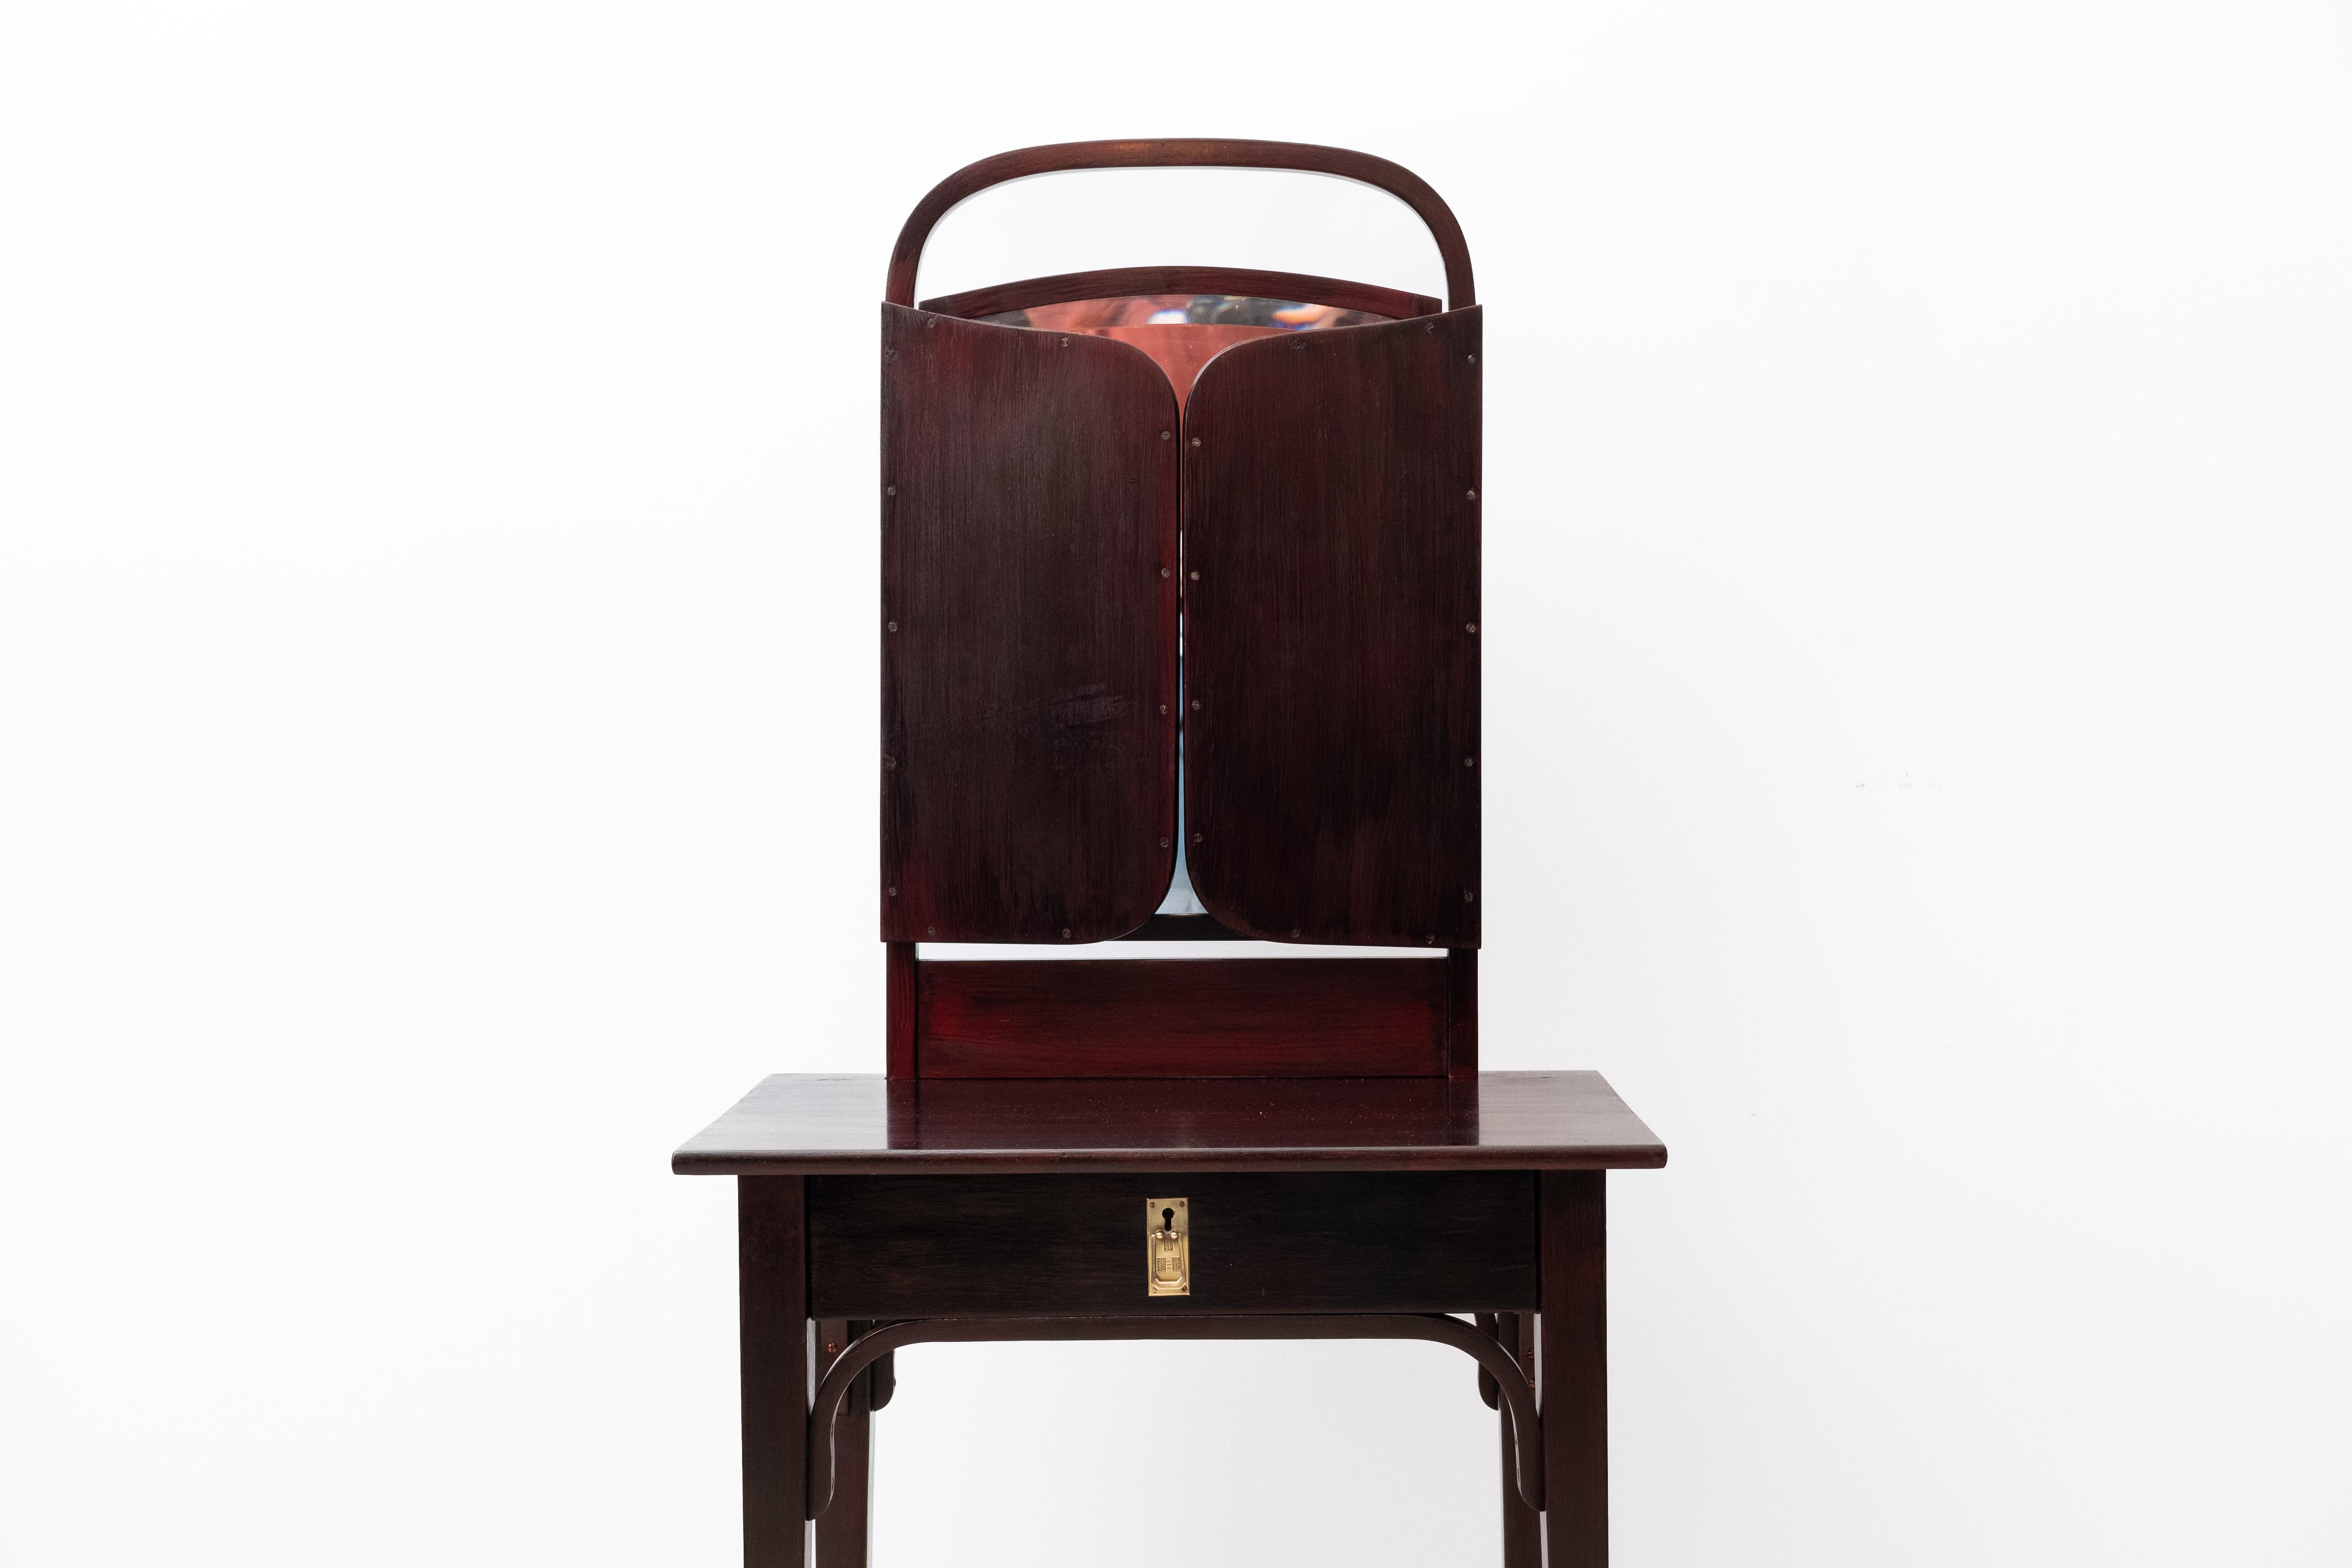 Art Nouveau Dressingtable from Thonet Brothers, Model 23045 (Vienna, 1910) For Sale 7